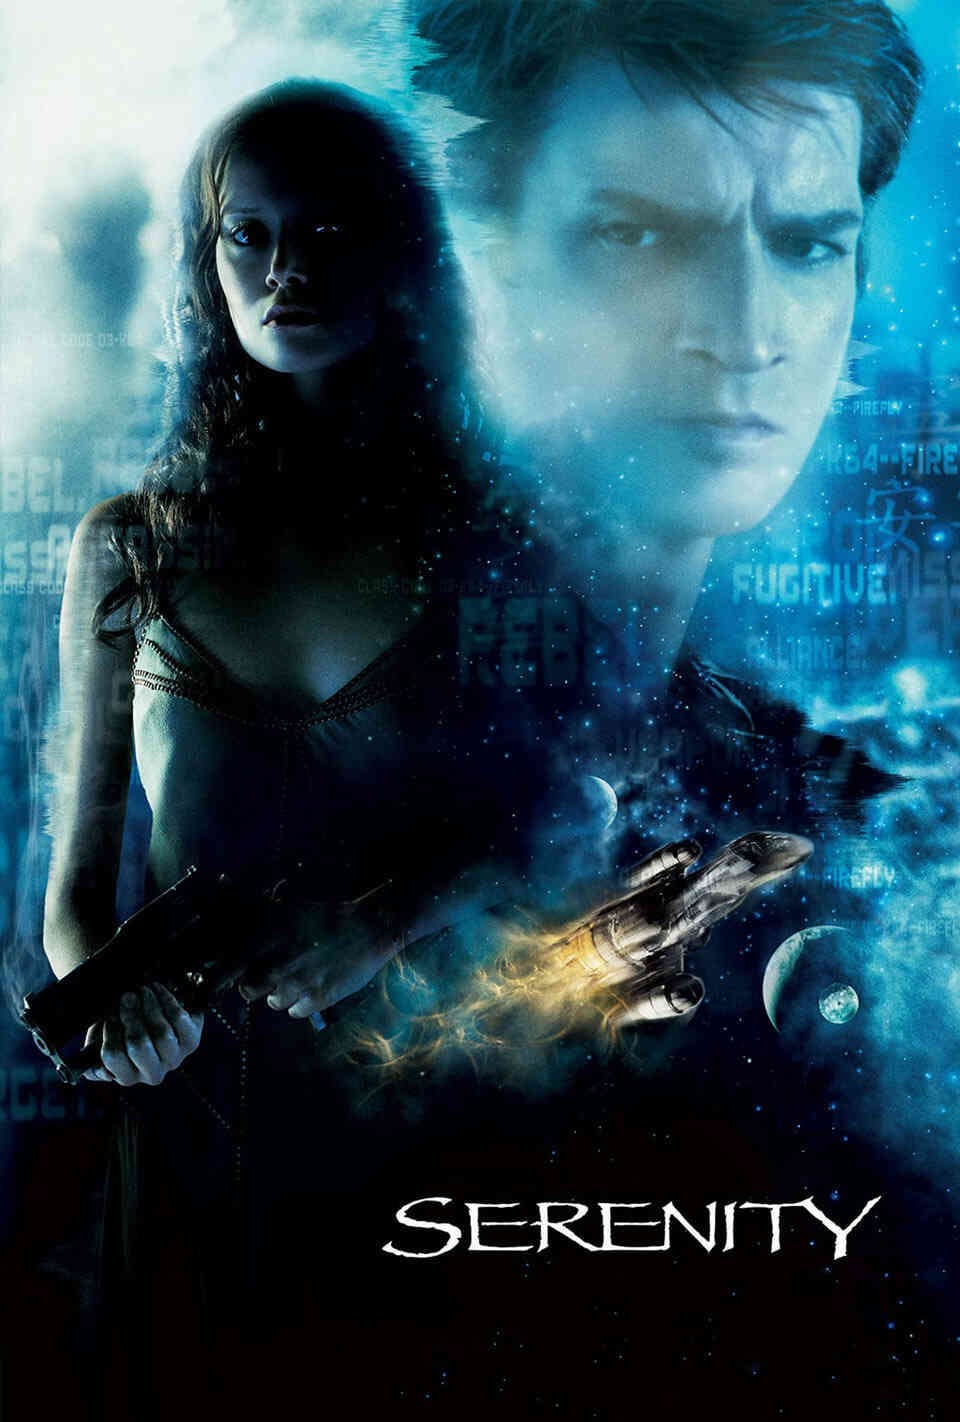 Read Serenity screenplay (poster)